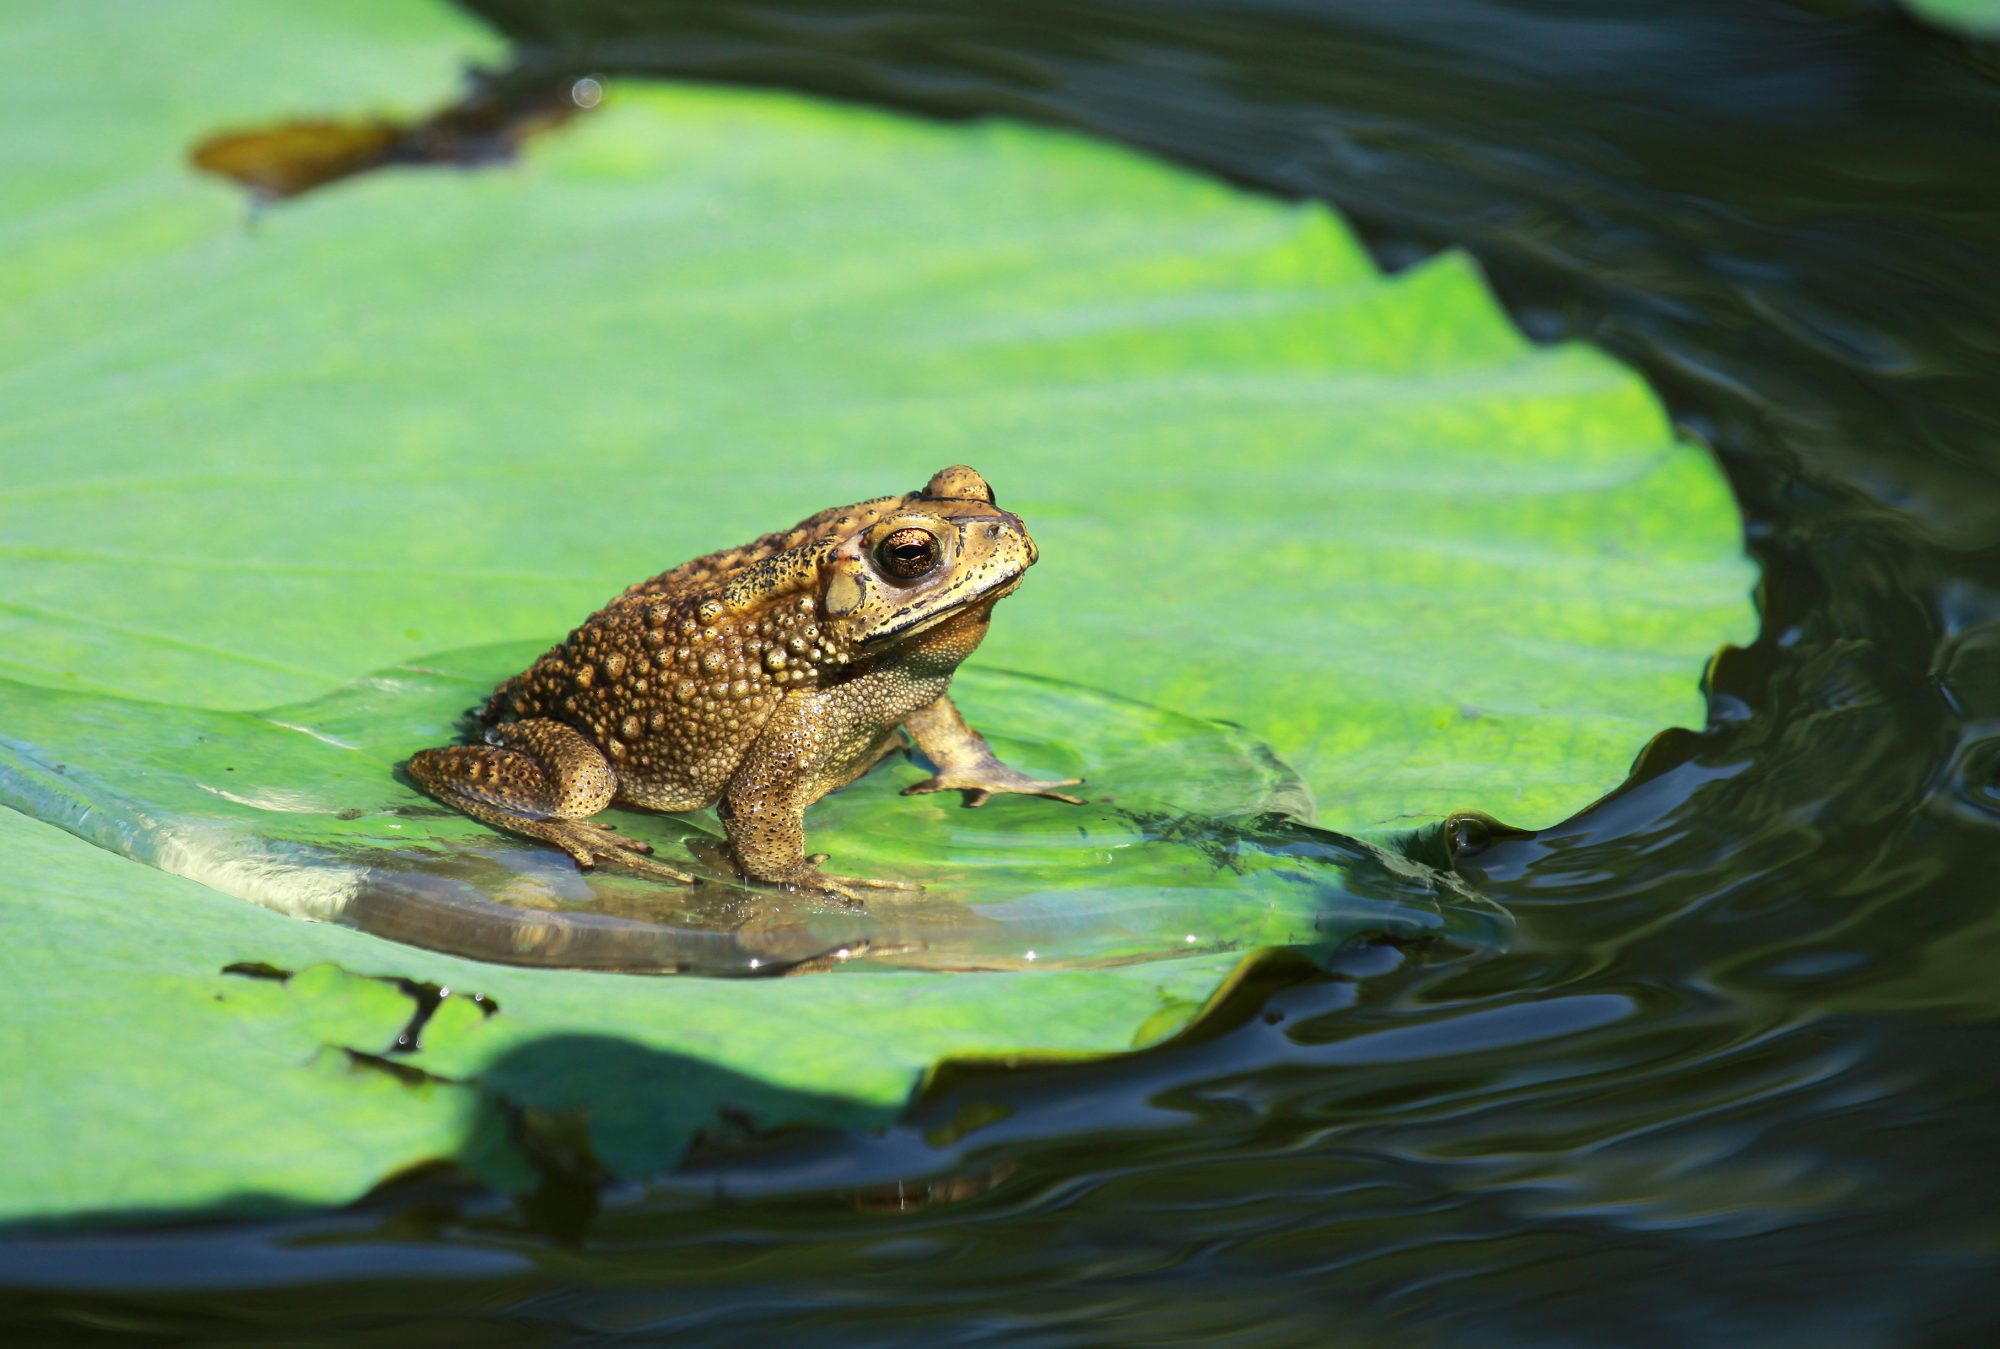 Toad on lotus leaf in nature